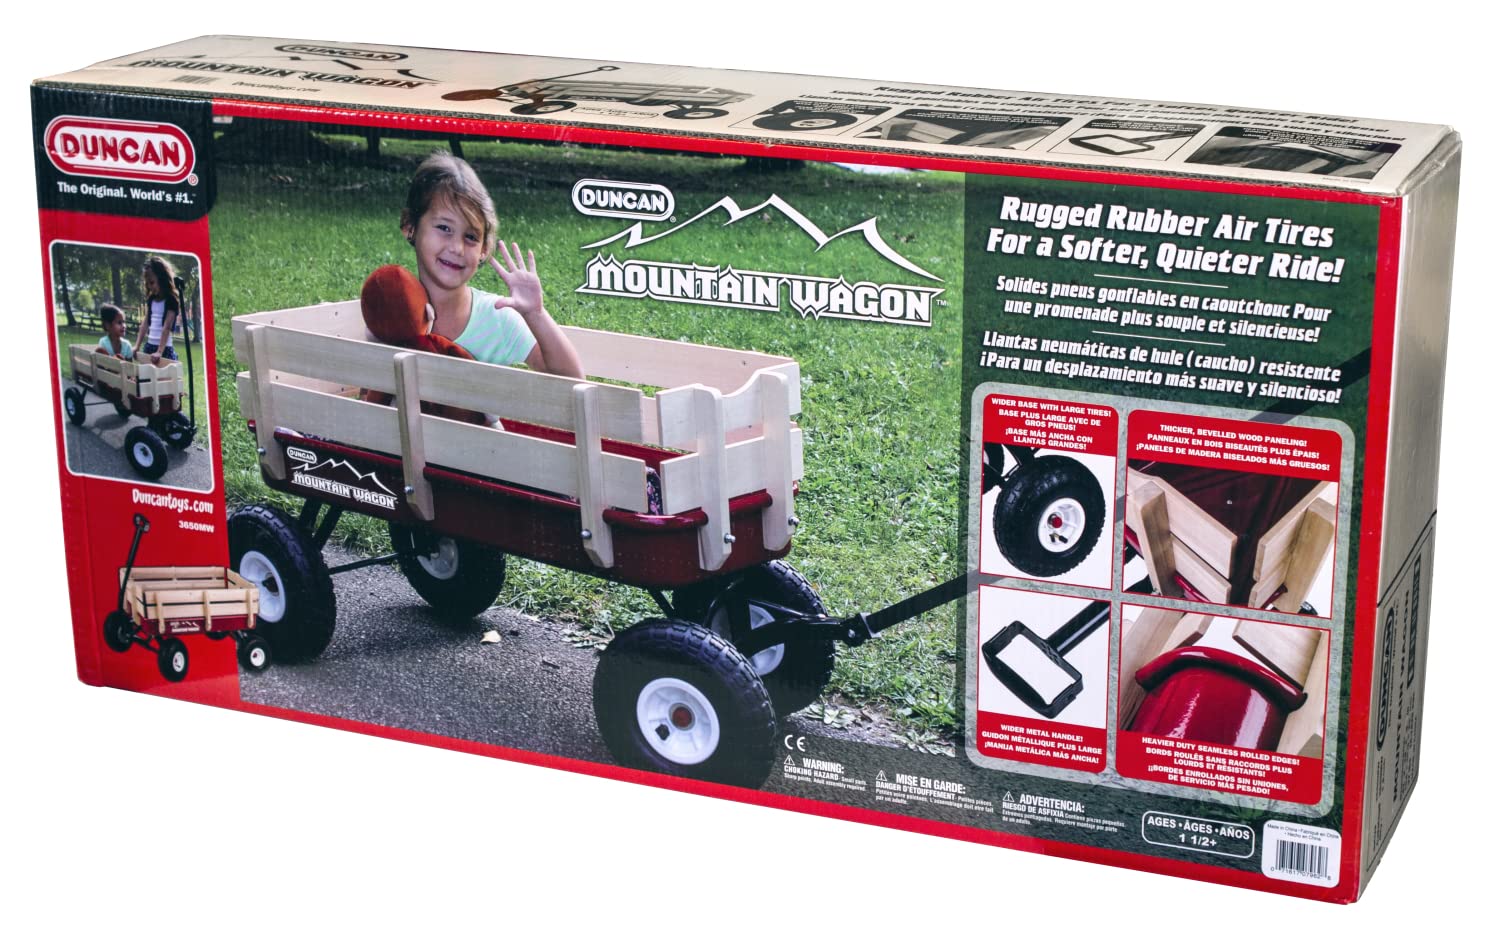 Duncan Mountain Wagon - Pull-Along Wagon for Kids with Wooden Panels, All Terrain Tires, Wide Grip Handle, Wide Wheel Base Red 41” x 22” x 38.5”